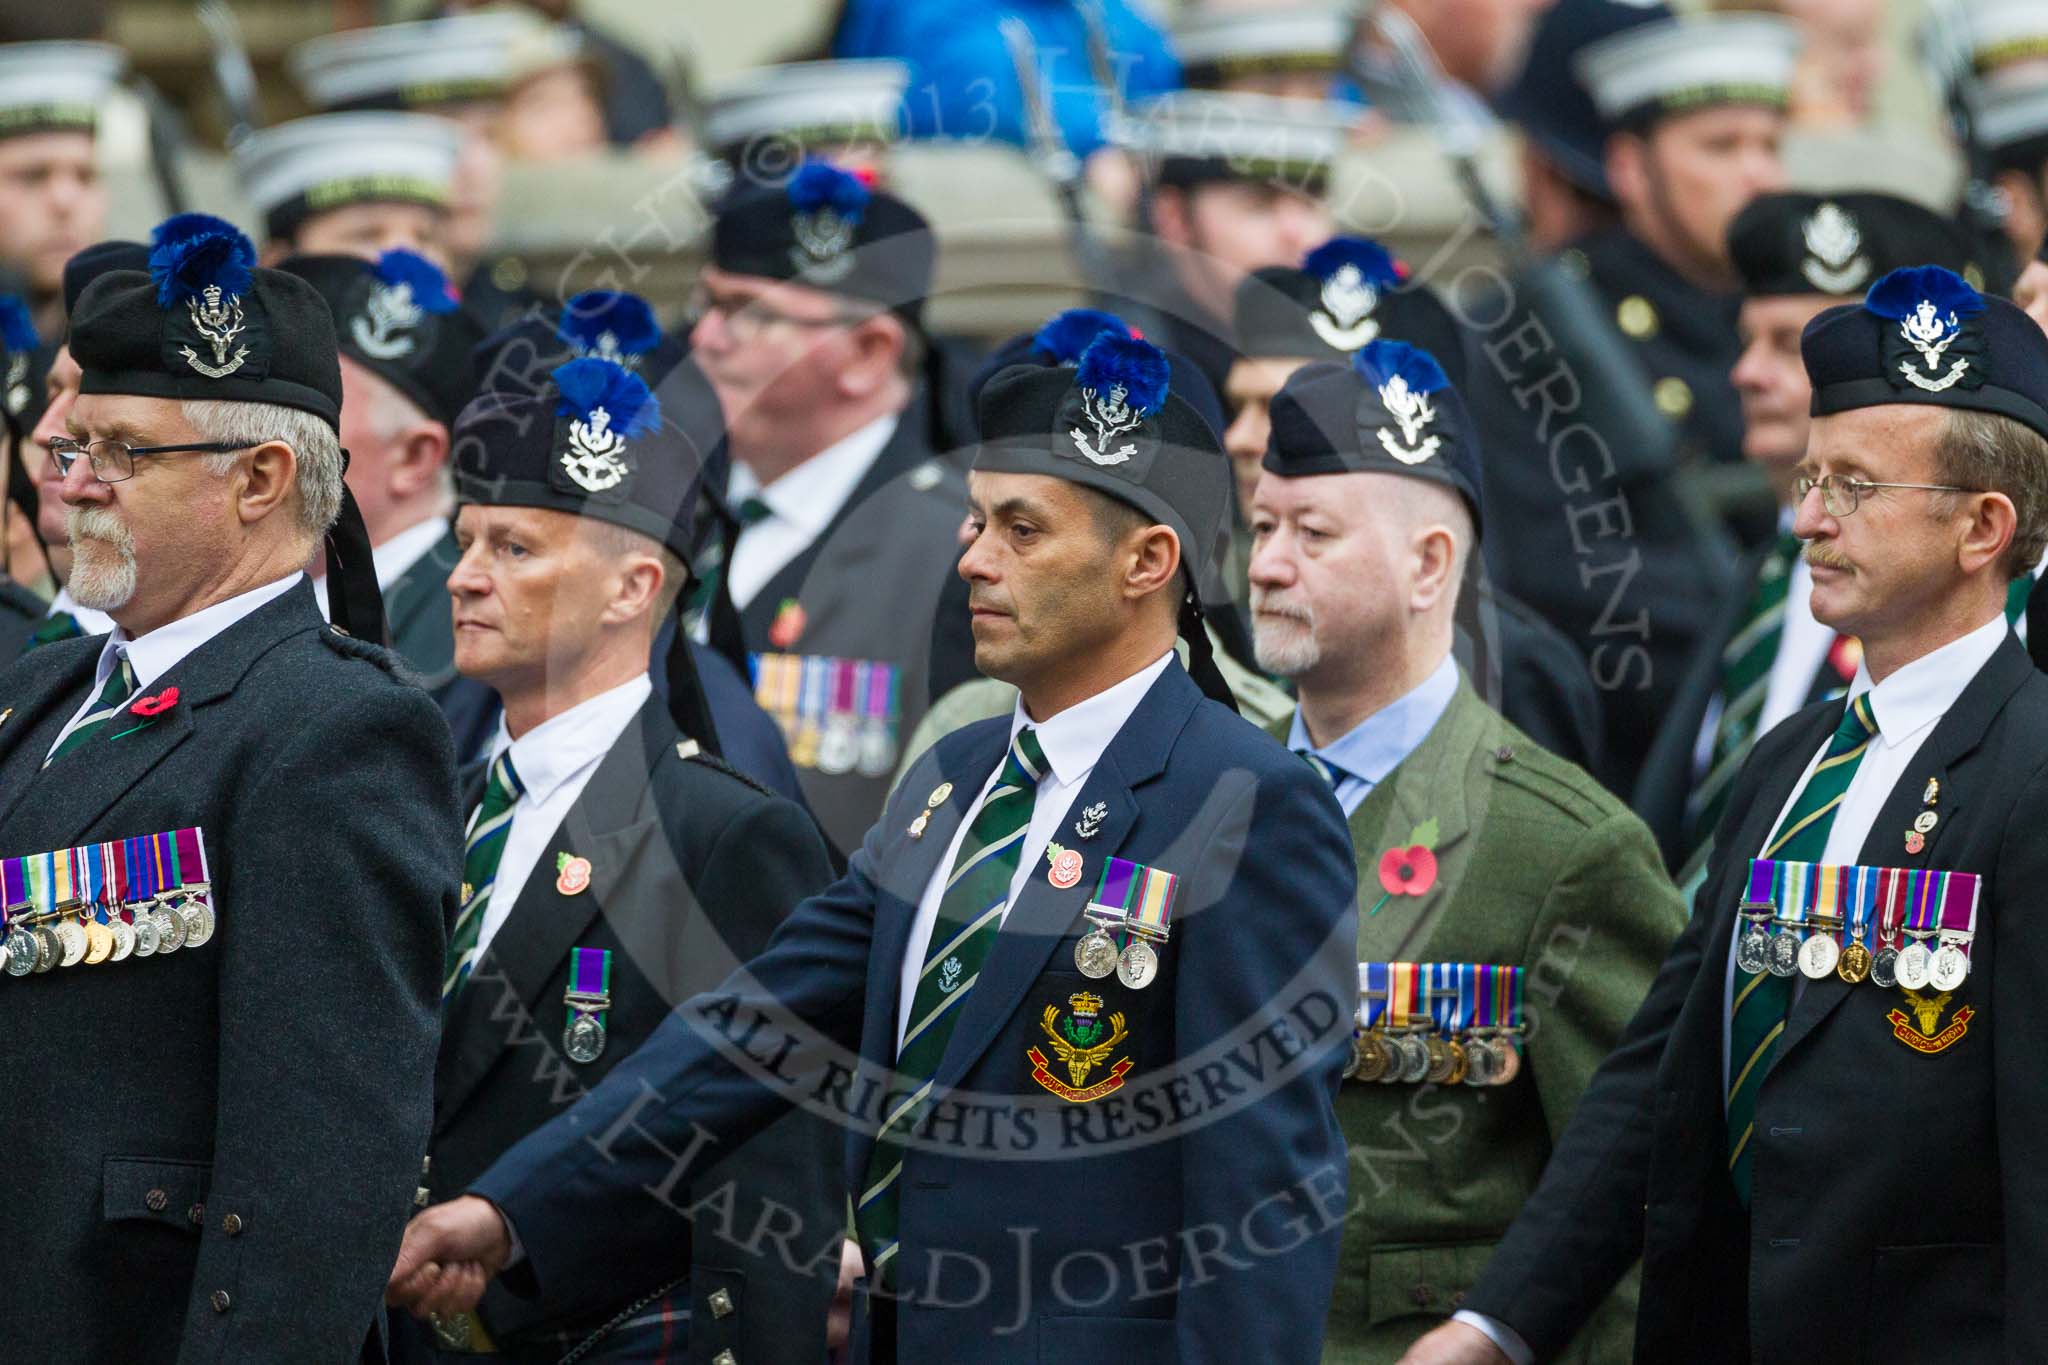 Remembrance Sunday at the Cenotaph 2015: Group A8, Queen's Own Highlanders Regimental Association.
Cenotaph, Whitehall, London SW1,
London,
Greater London,
United Kingdom,
on 08 November 2015 at 12:10, image #1239